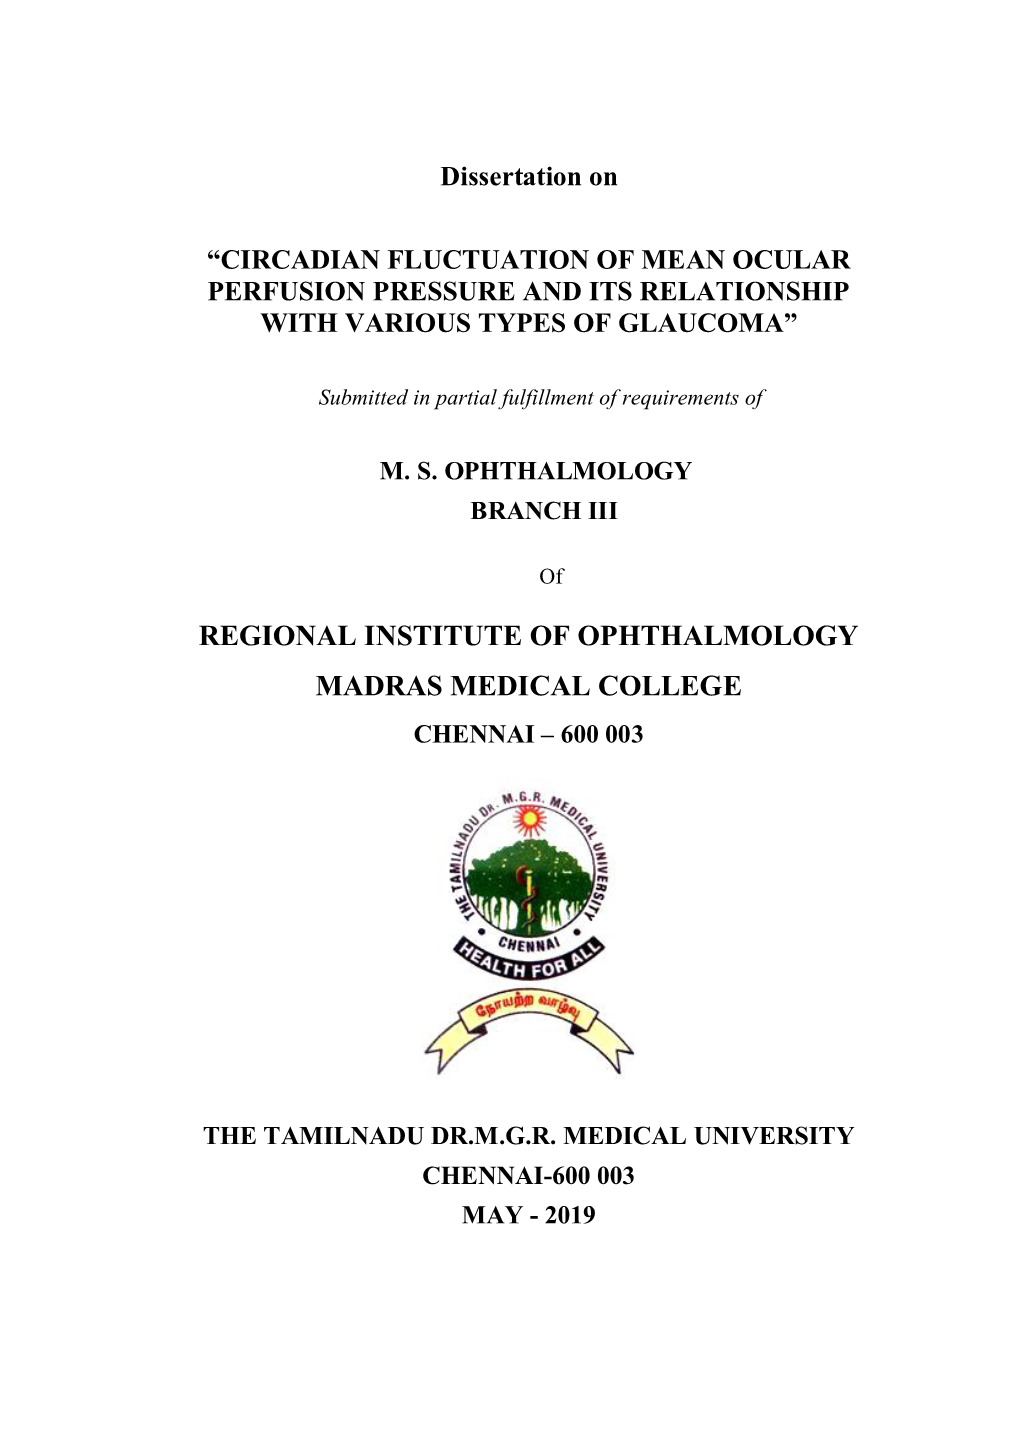 Regional Institute of Ophthalmology Madras Medical College Chennai – 600 003